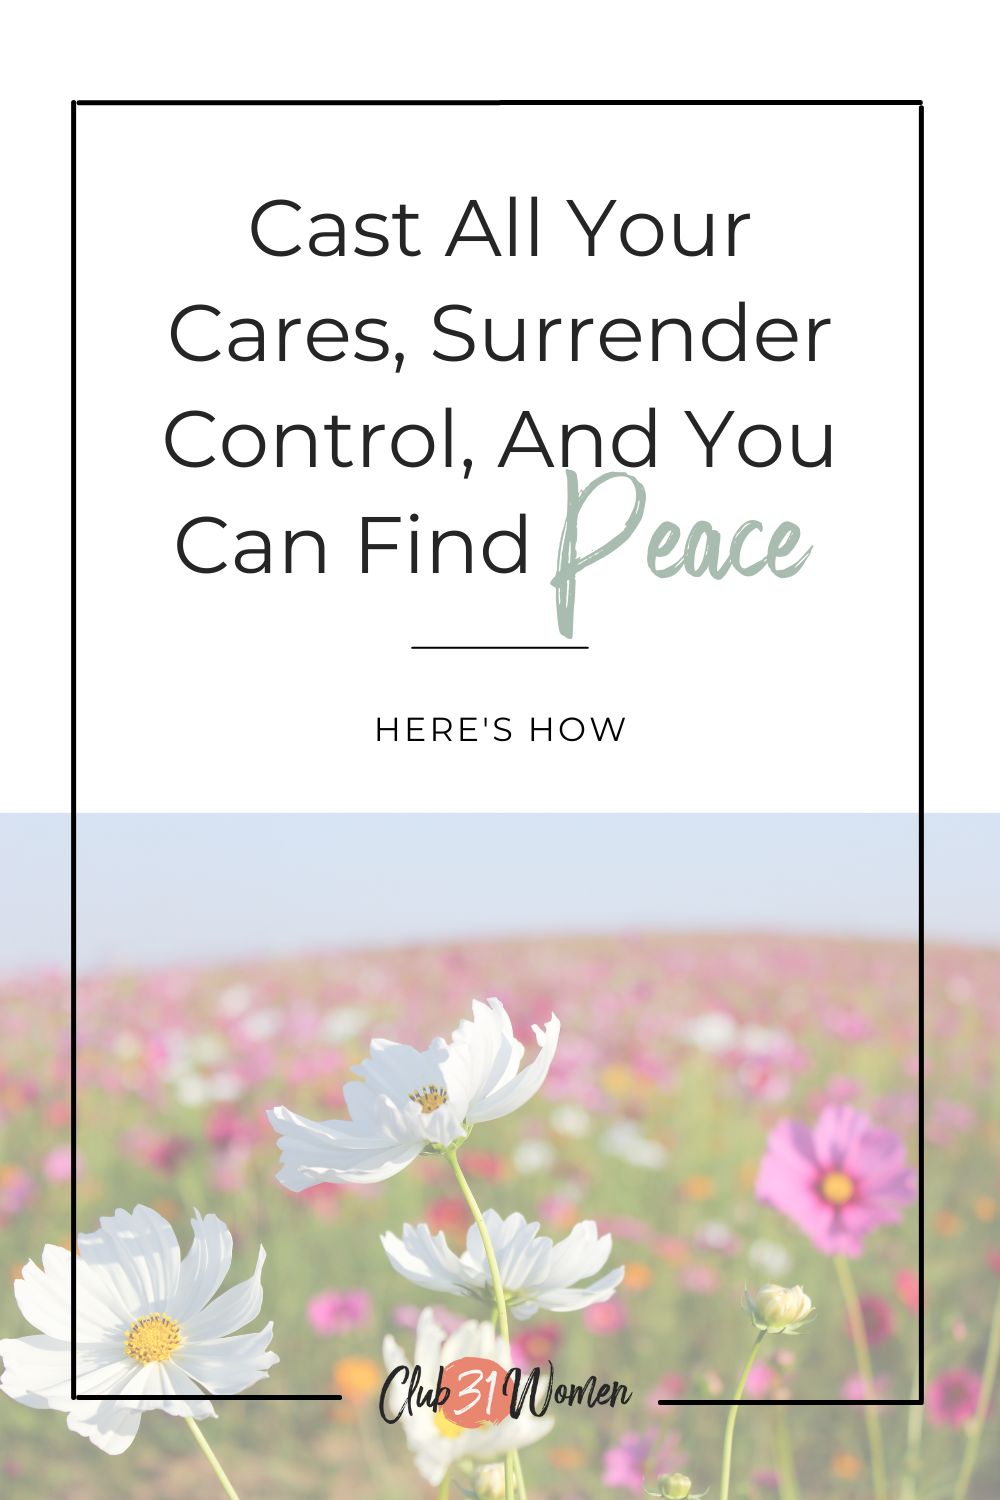 Cast All Your Cares, Surrender Control, And You Can Find Peace via @Club31Women